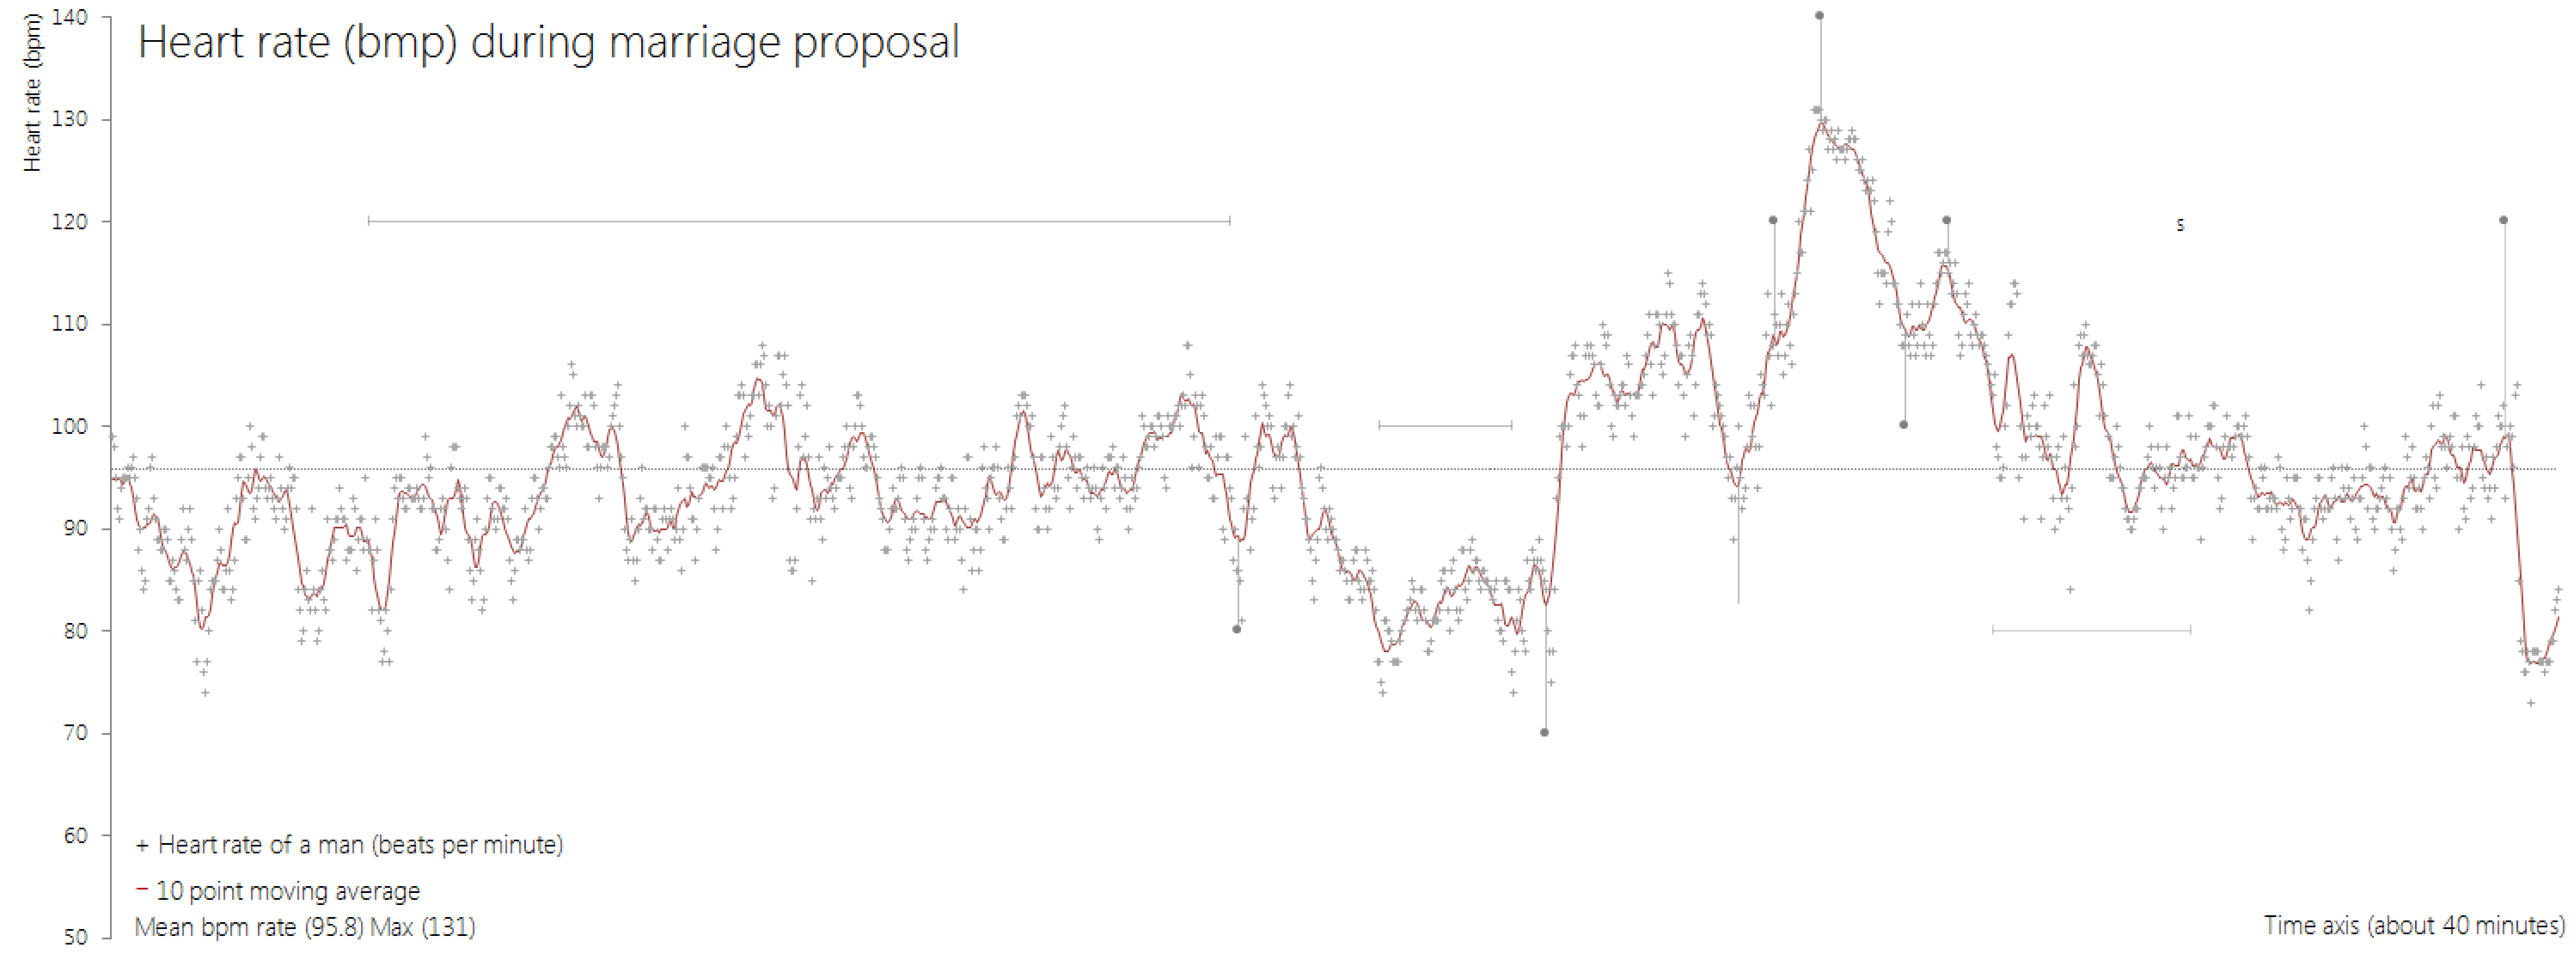 The same chart as above, but with the title 'Heart rate (bpm) during marriage proposal'